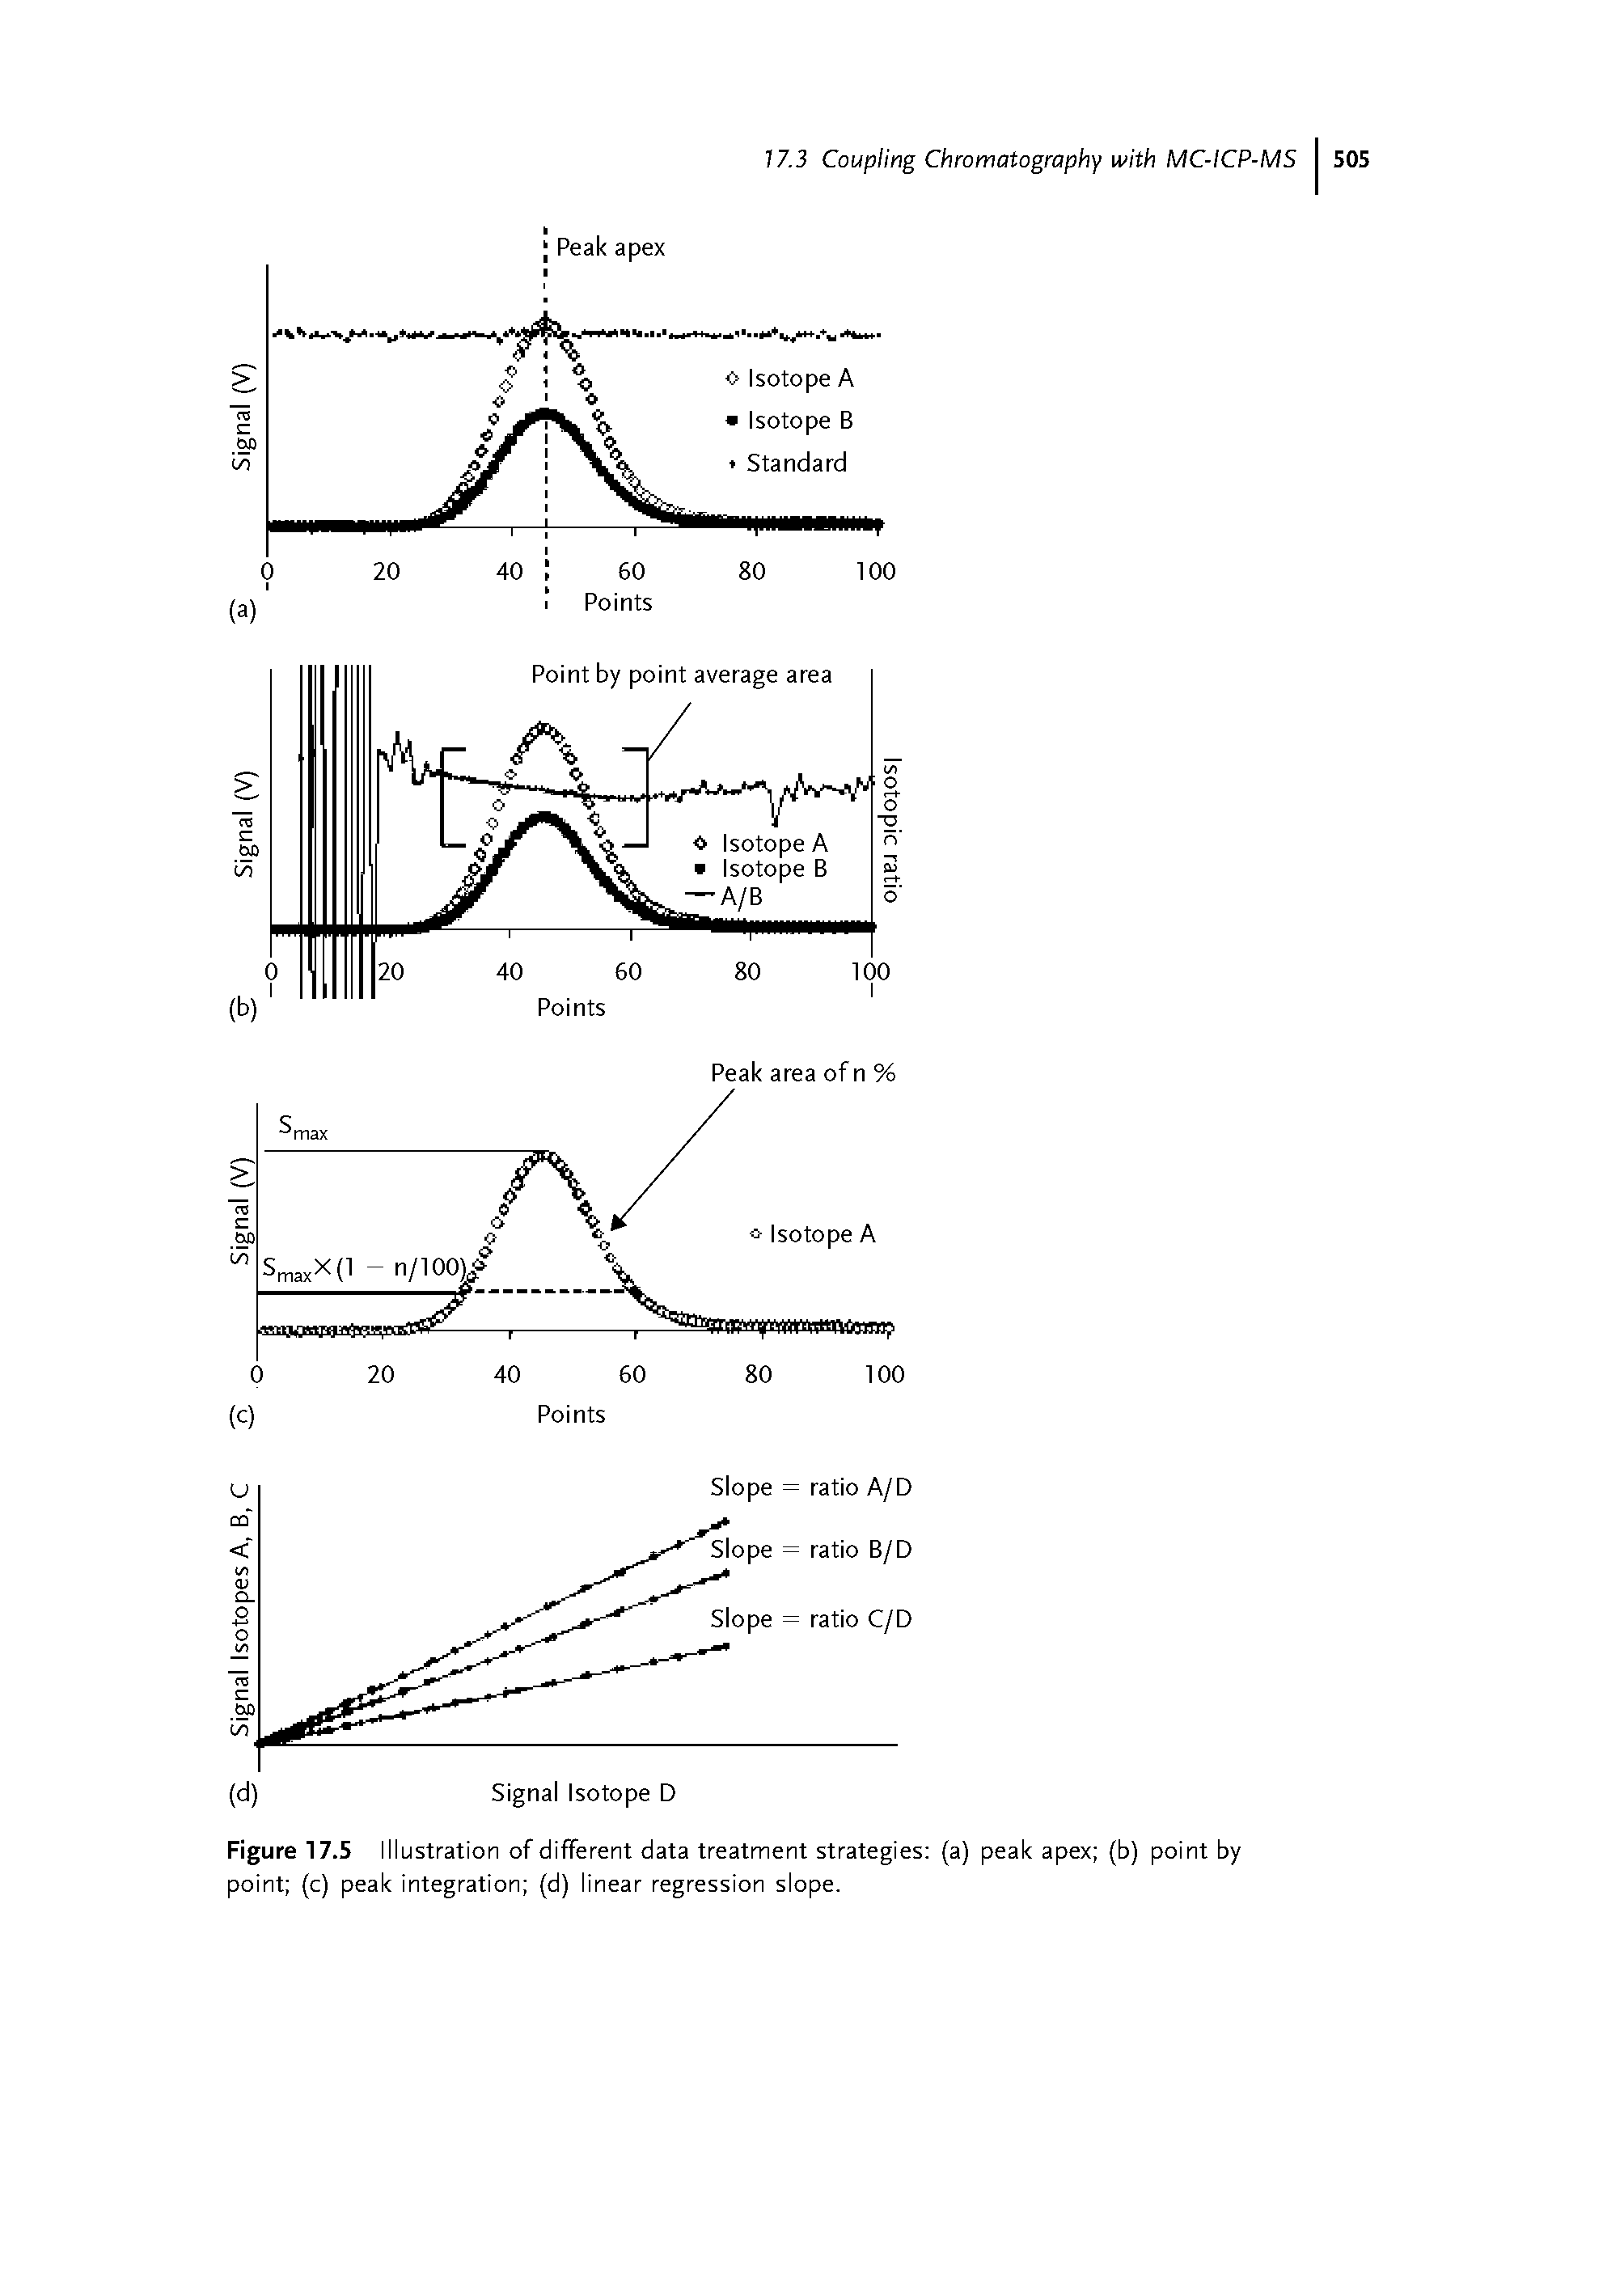 Figure 17.5 Illustration of different data treatment strategies (a) peak apex (b) point by point (c) peak integration (d) linear regression slope.